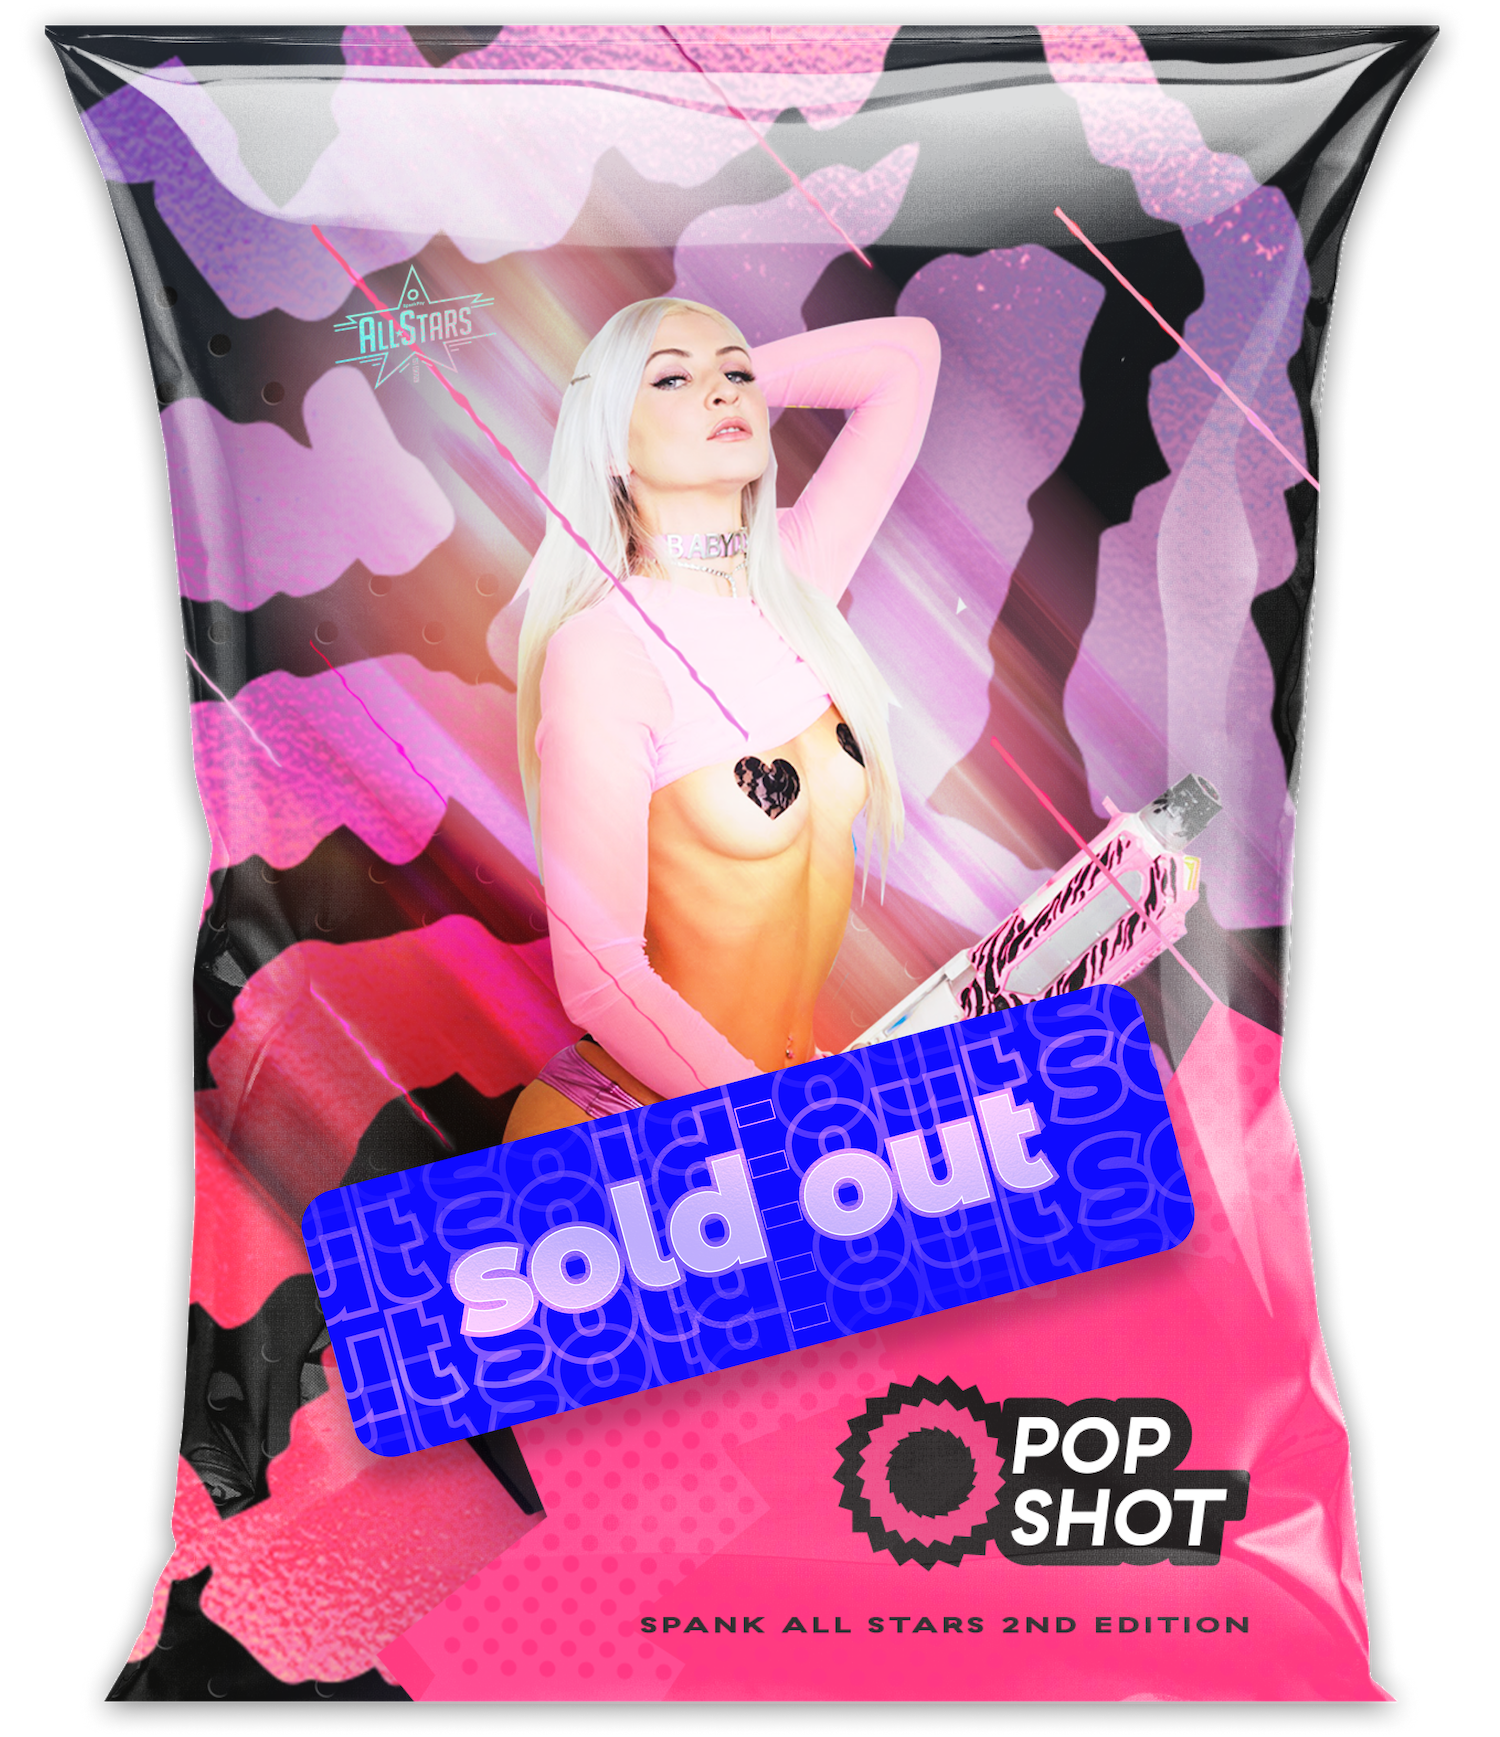 Shiny metallic packaging with Pop Shot logo and model serenity sky wearing black heart nipple stickers